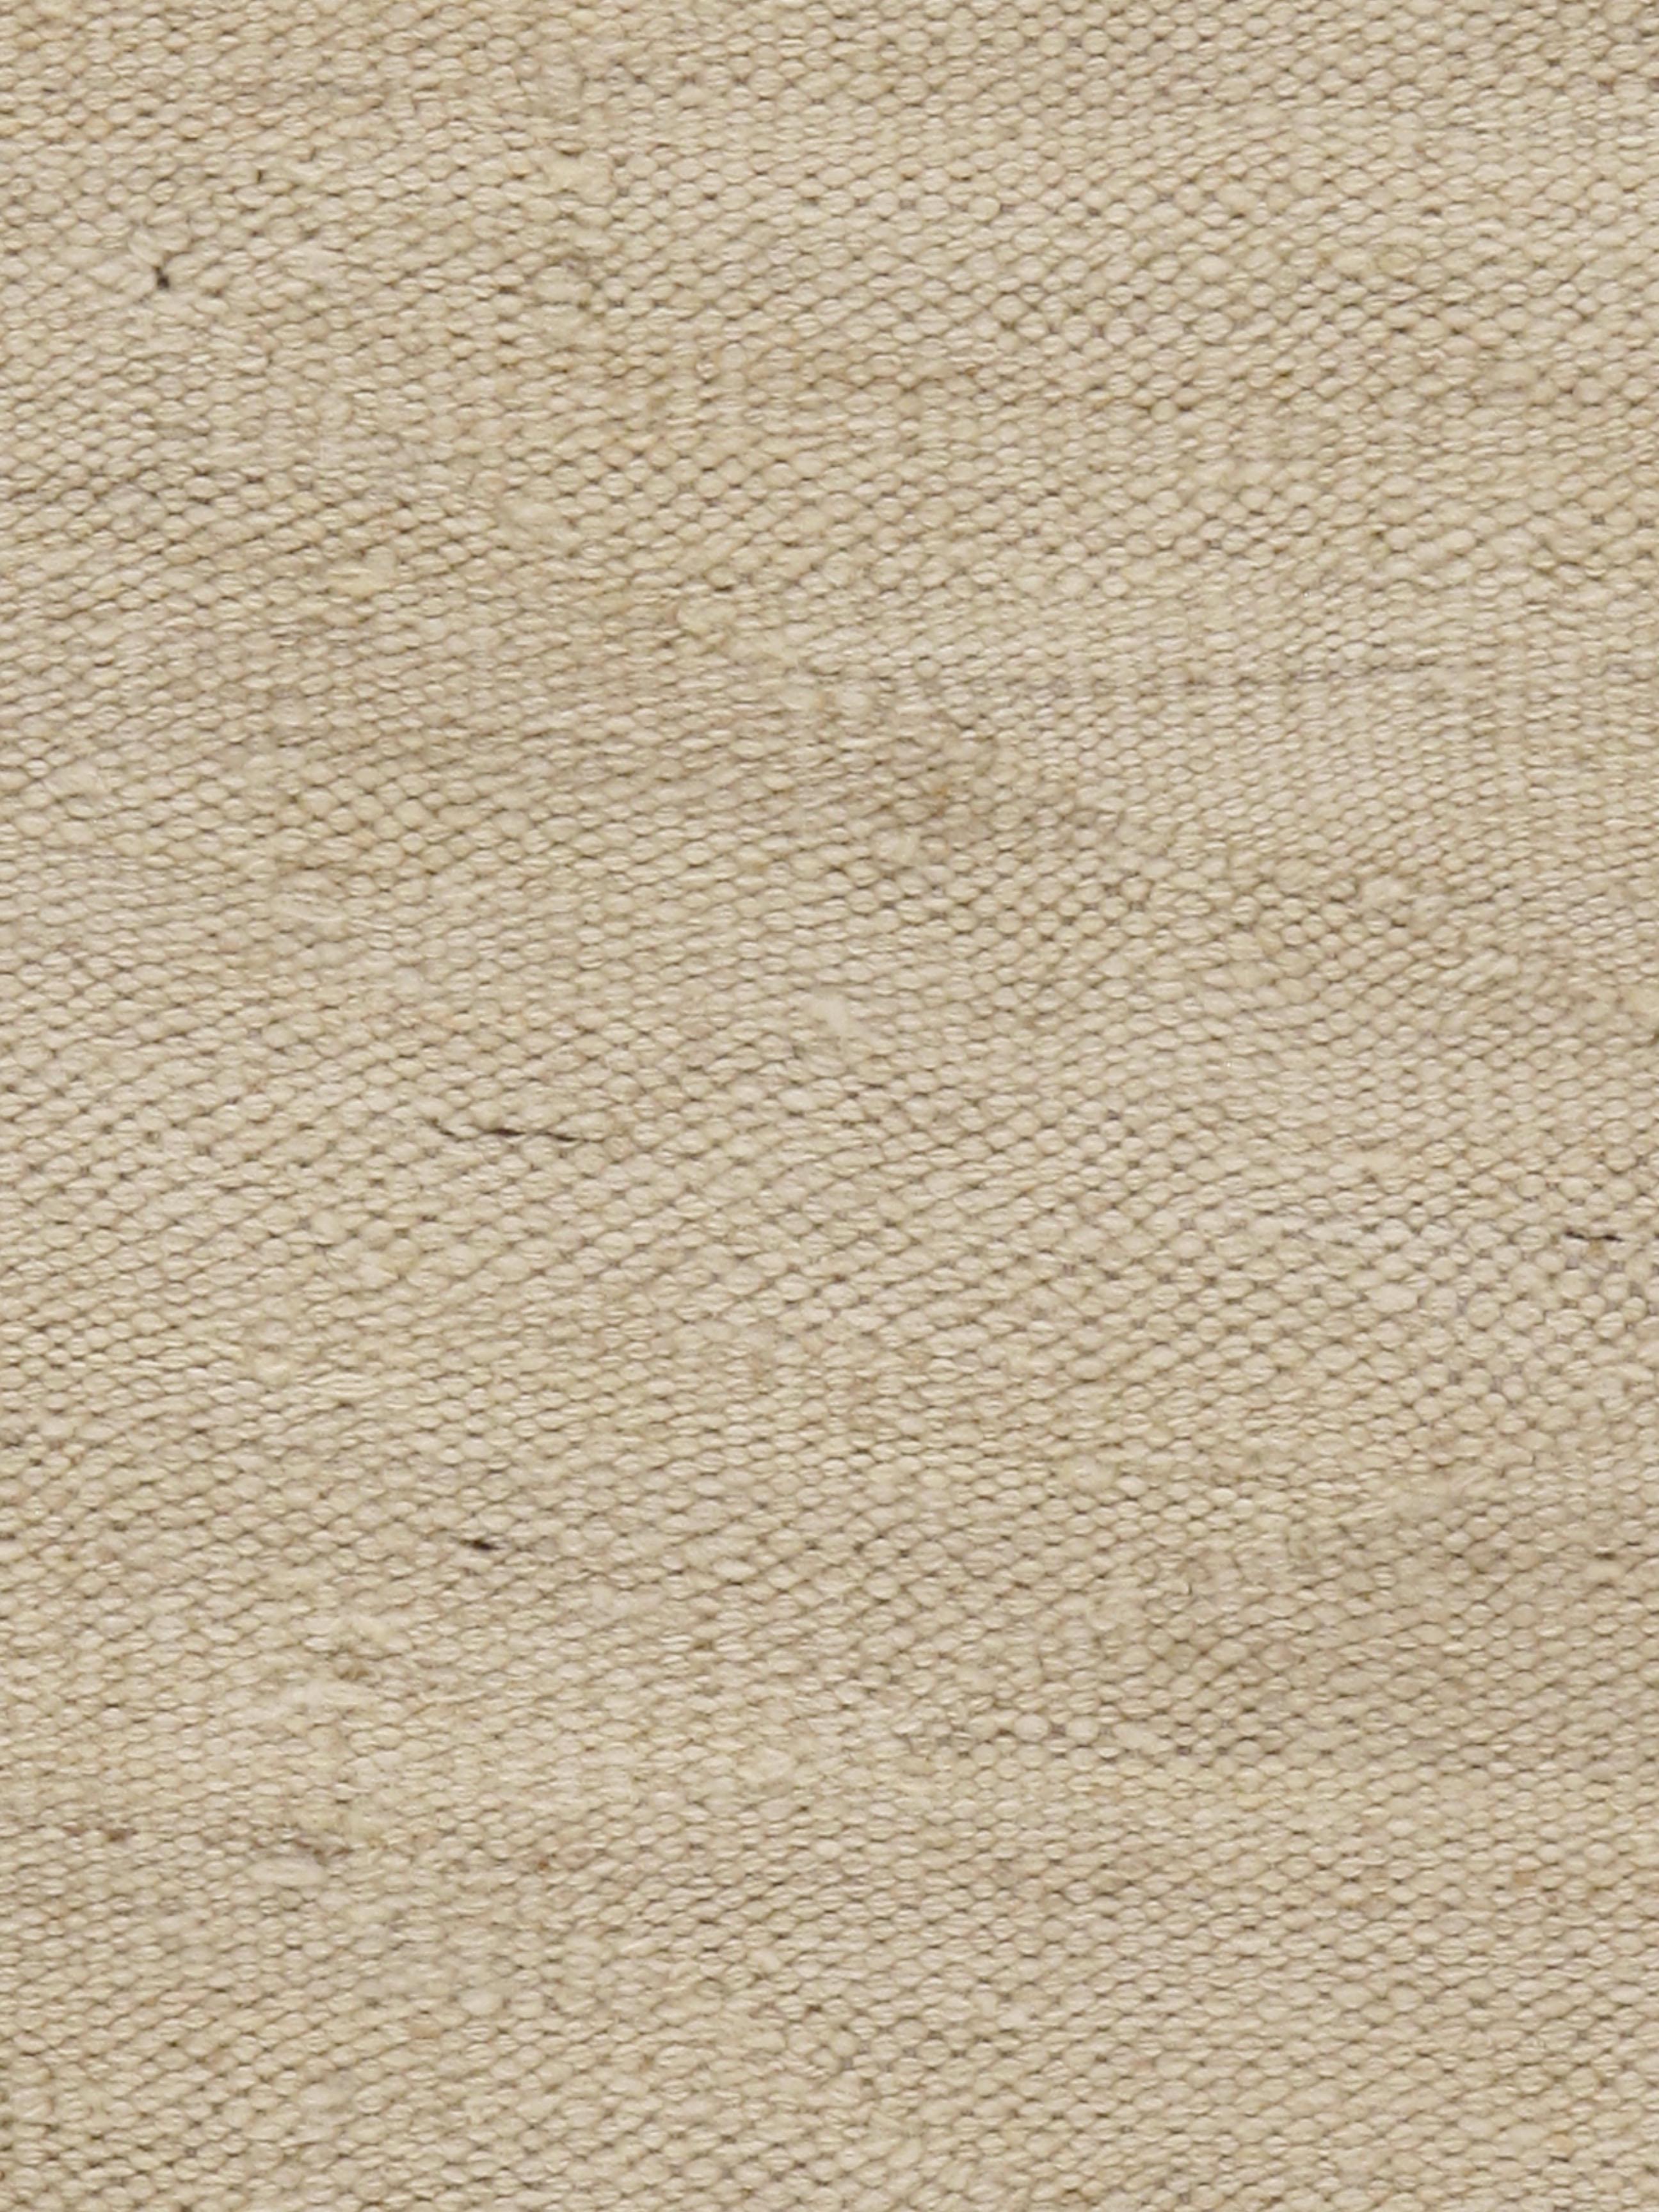 Modern Handwoven Kilim Ivory-Beige Area Rug  9'2 x 11'9 In New Condition For Sale In New York, NY